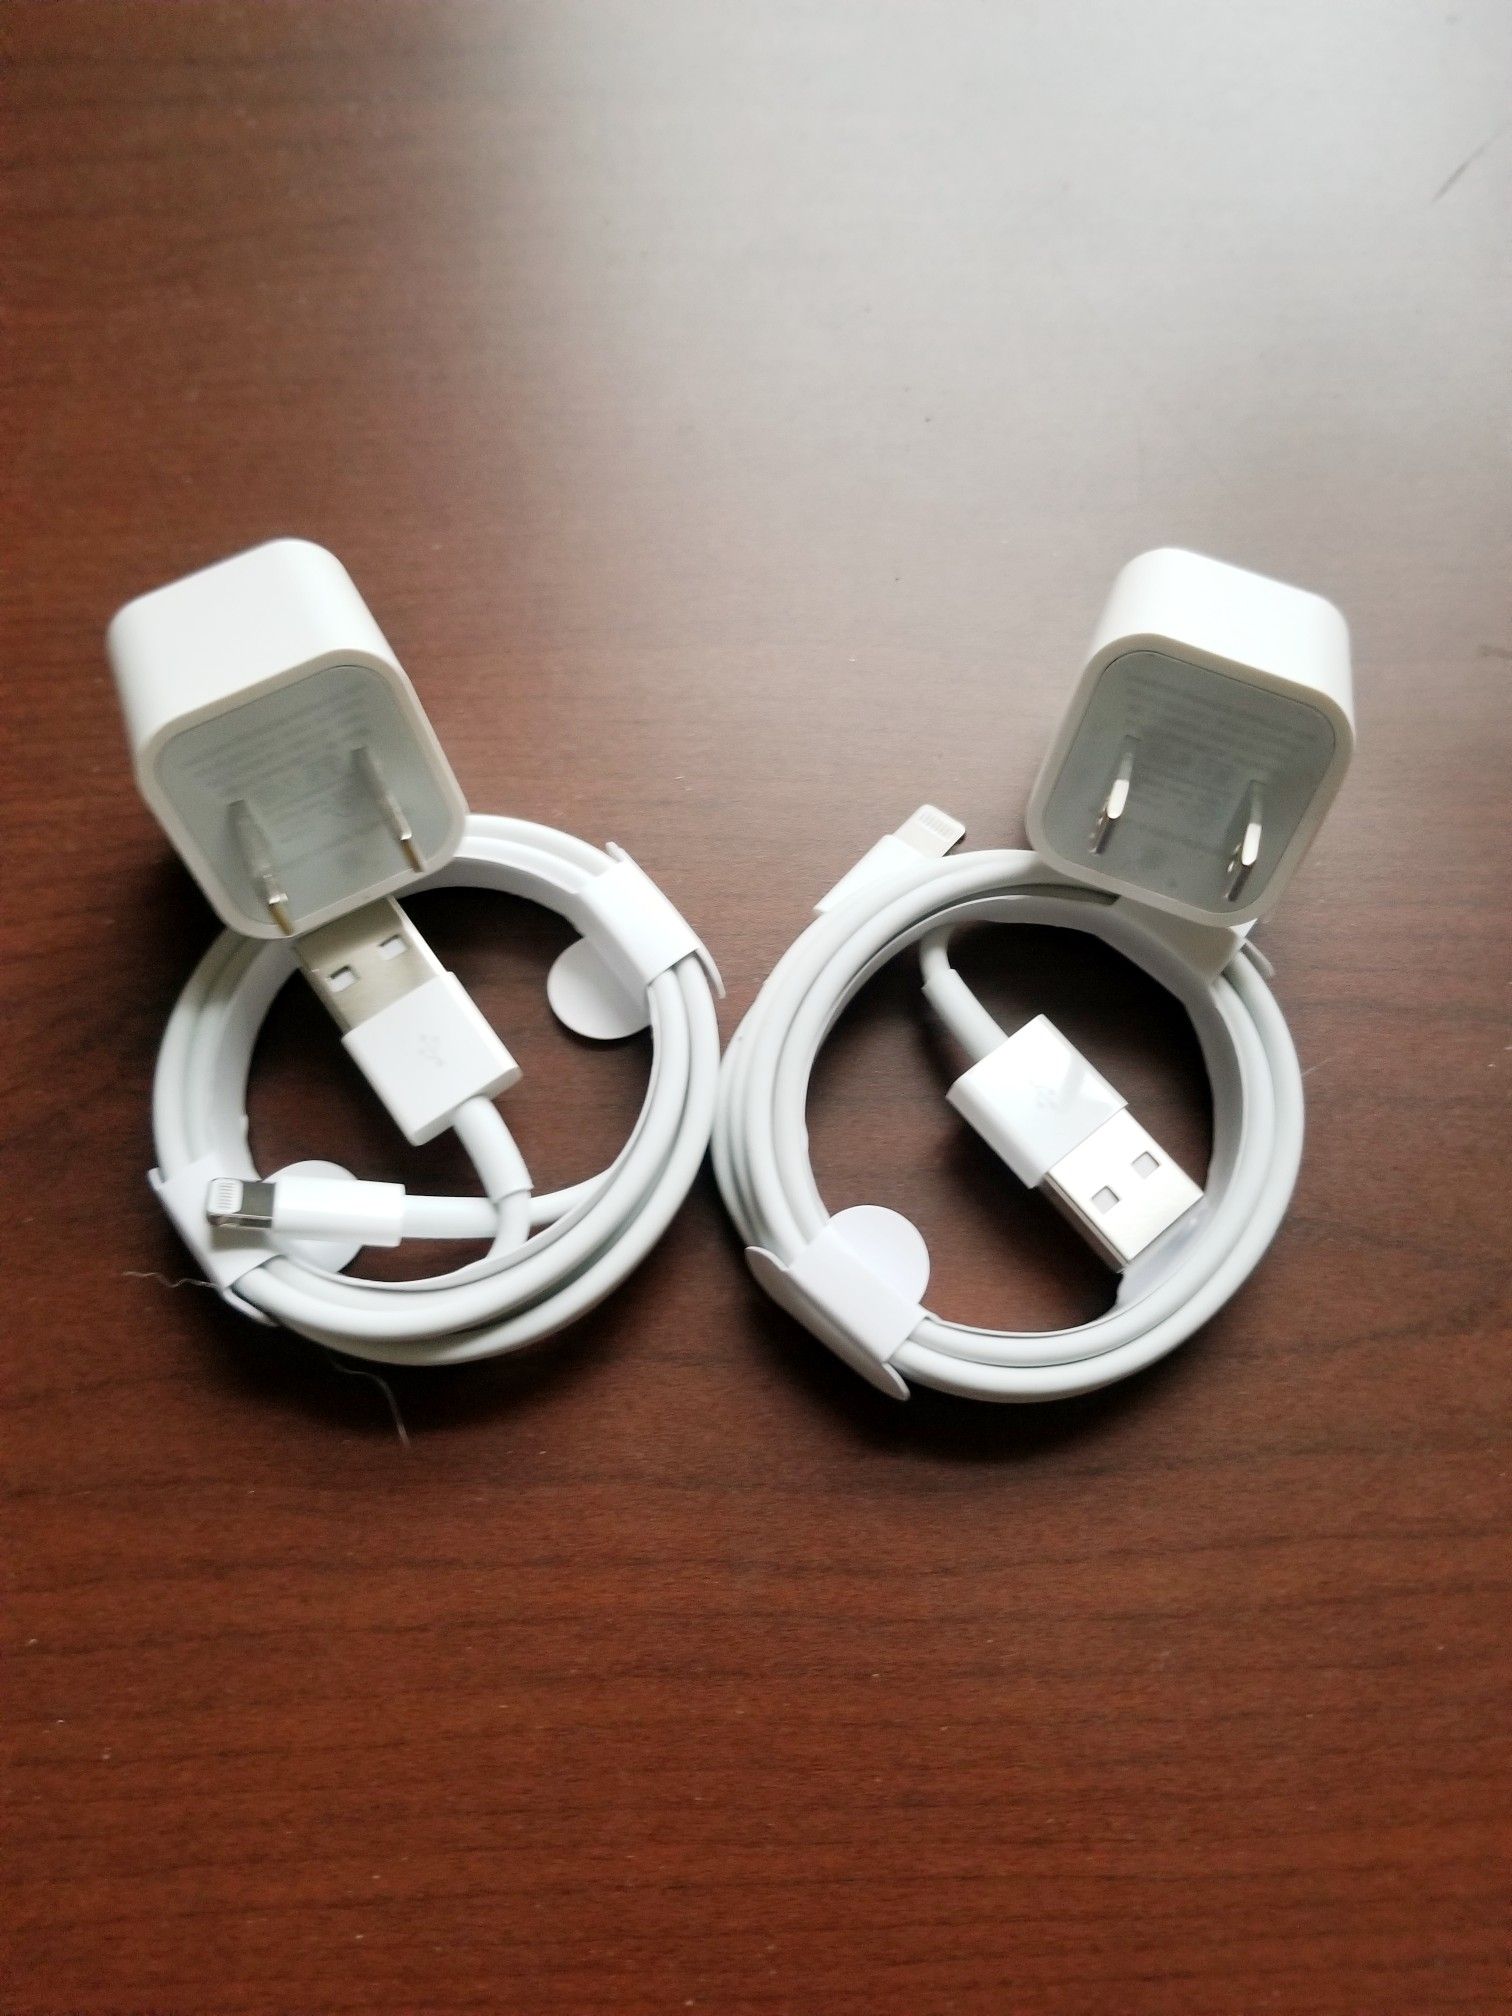 2 brand new iphone chargers